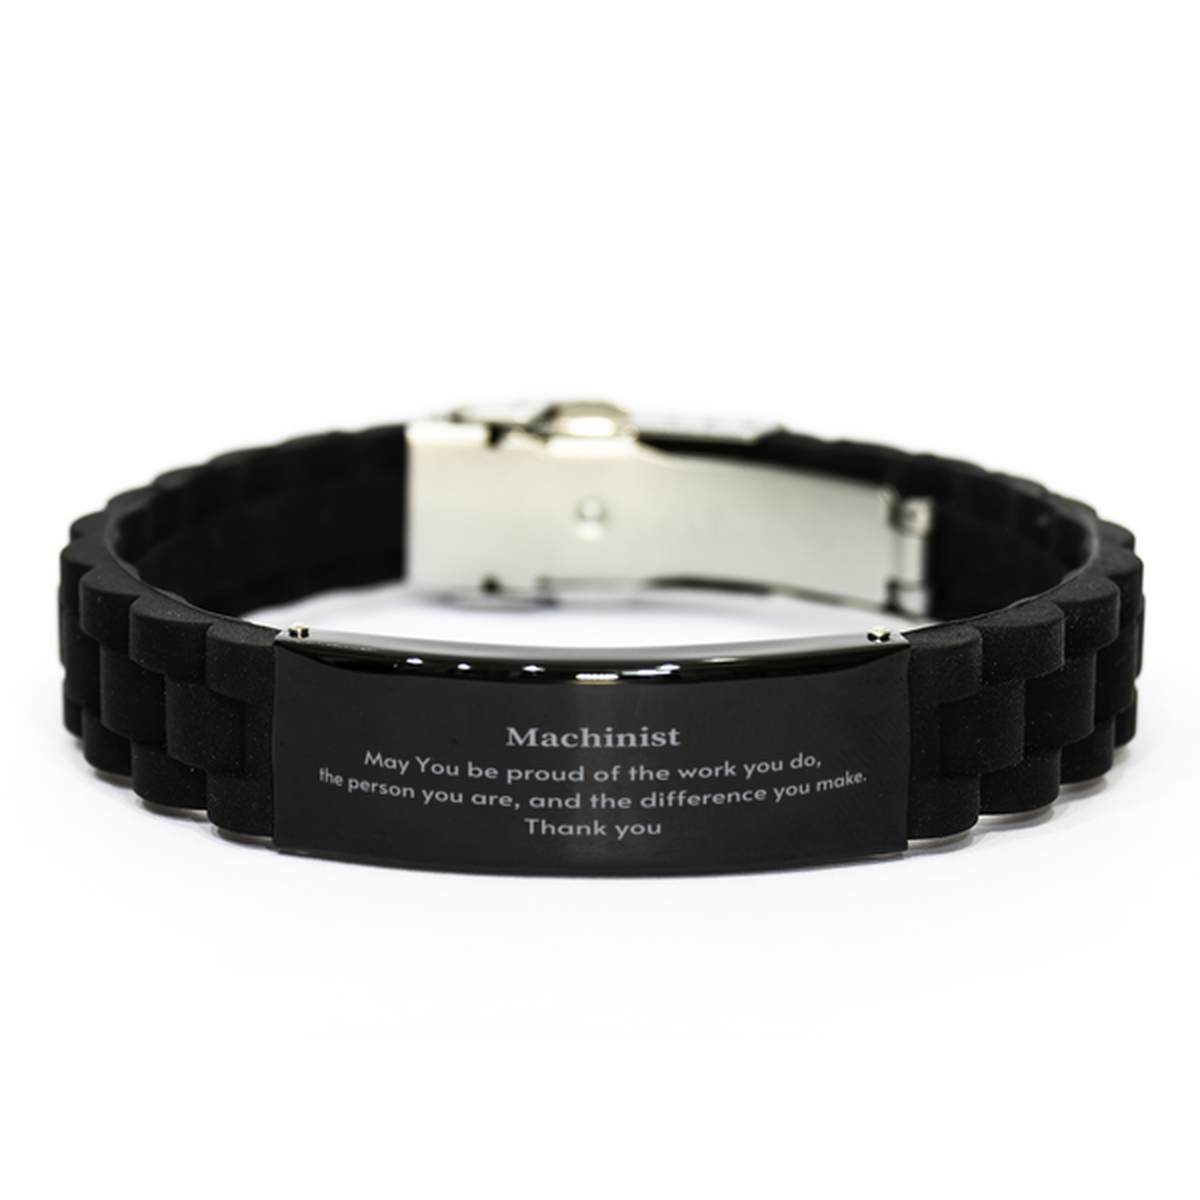 Heartwarming Black Glidelock Clasp Bracelet Retirement Coworkers Gifts for Machinist, Machinist May You be proud of the work you do, the person you are Gifts for Boss Men Women Friends